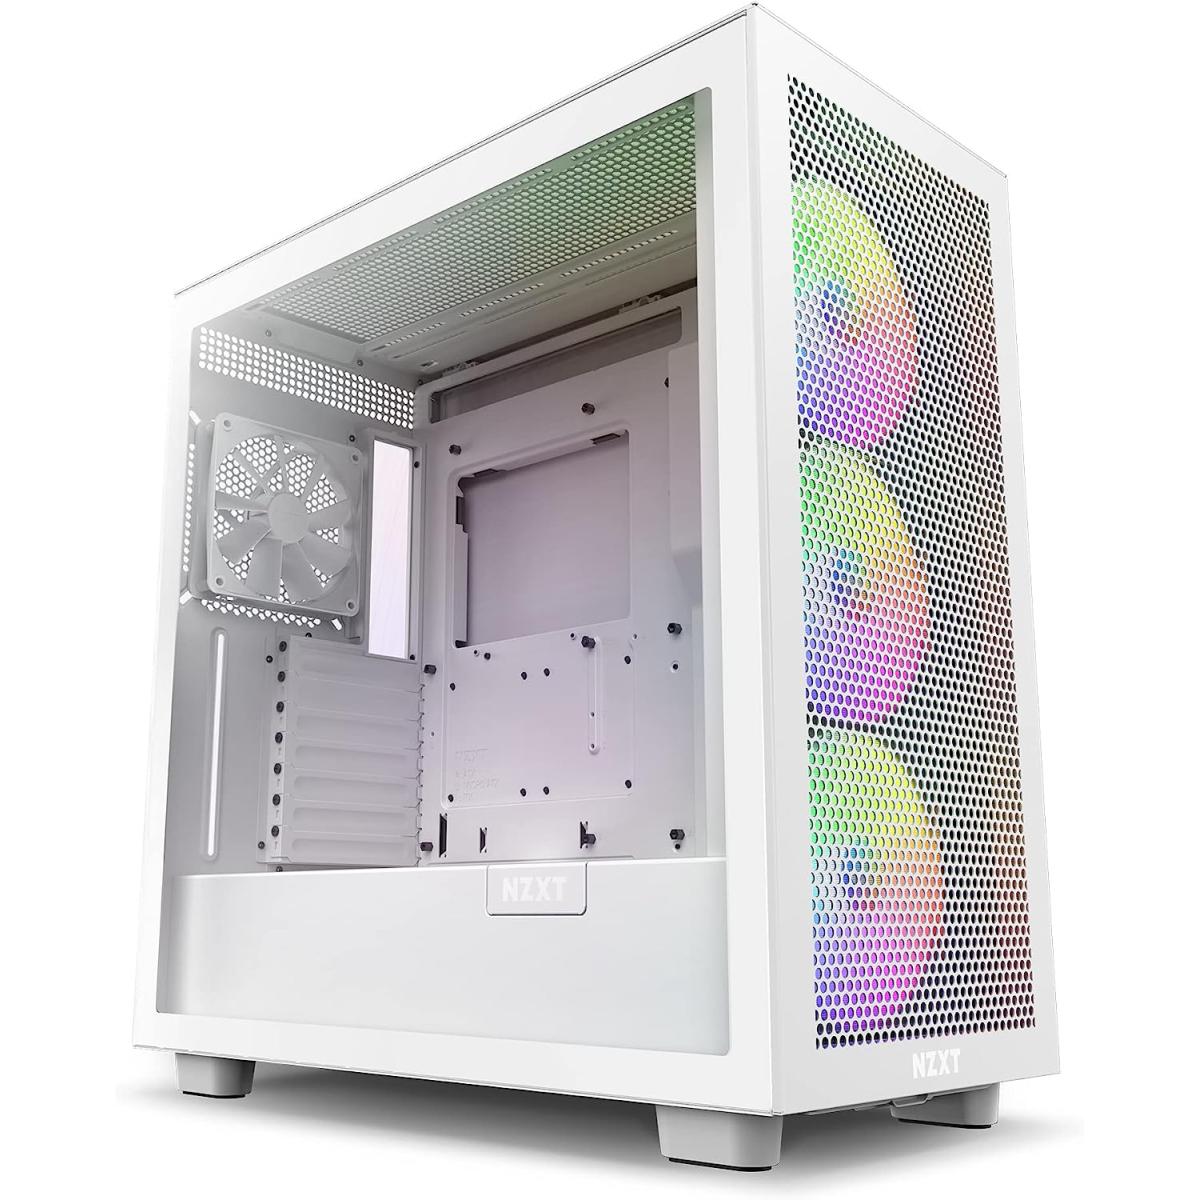 NZXT H7 Flow RGB ATX Tempered Glass Mid Tower Perforated & Ventilated Gaming Case w/ 3x140mm RGB Fans + 1x120mm Quiet & USB Type-C Port - Matte White